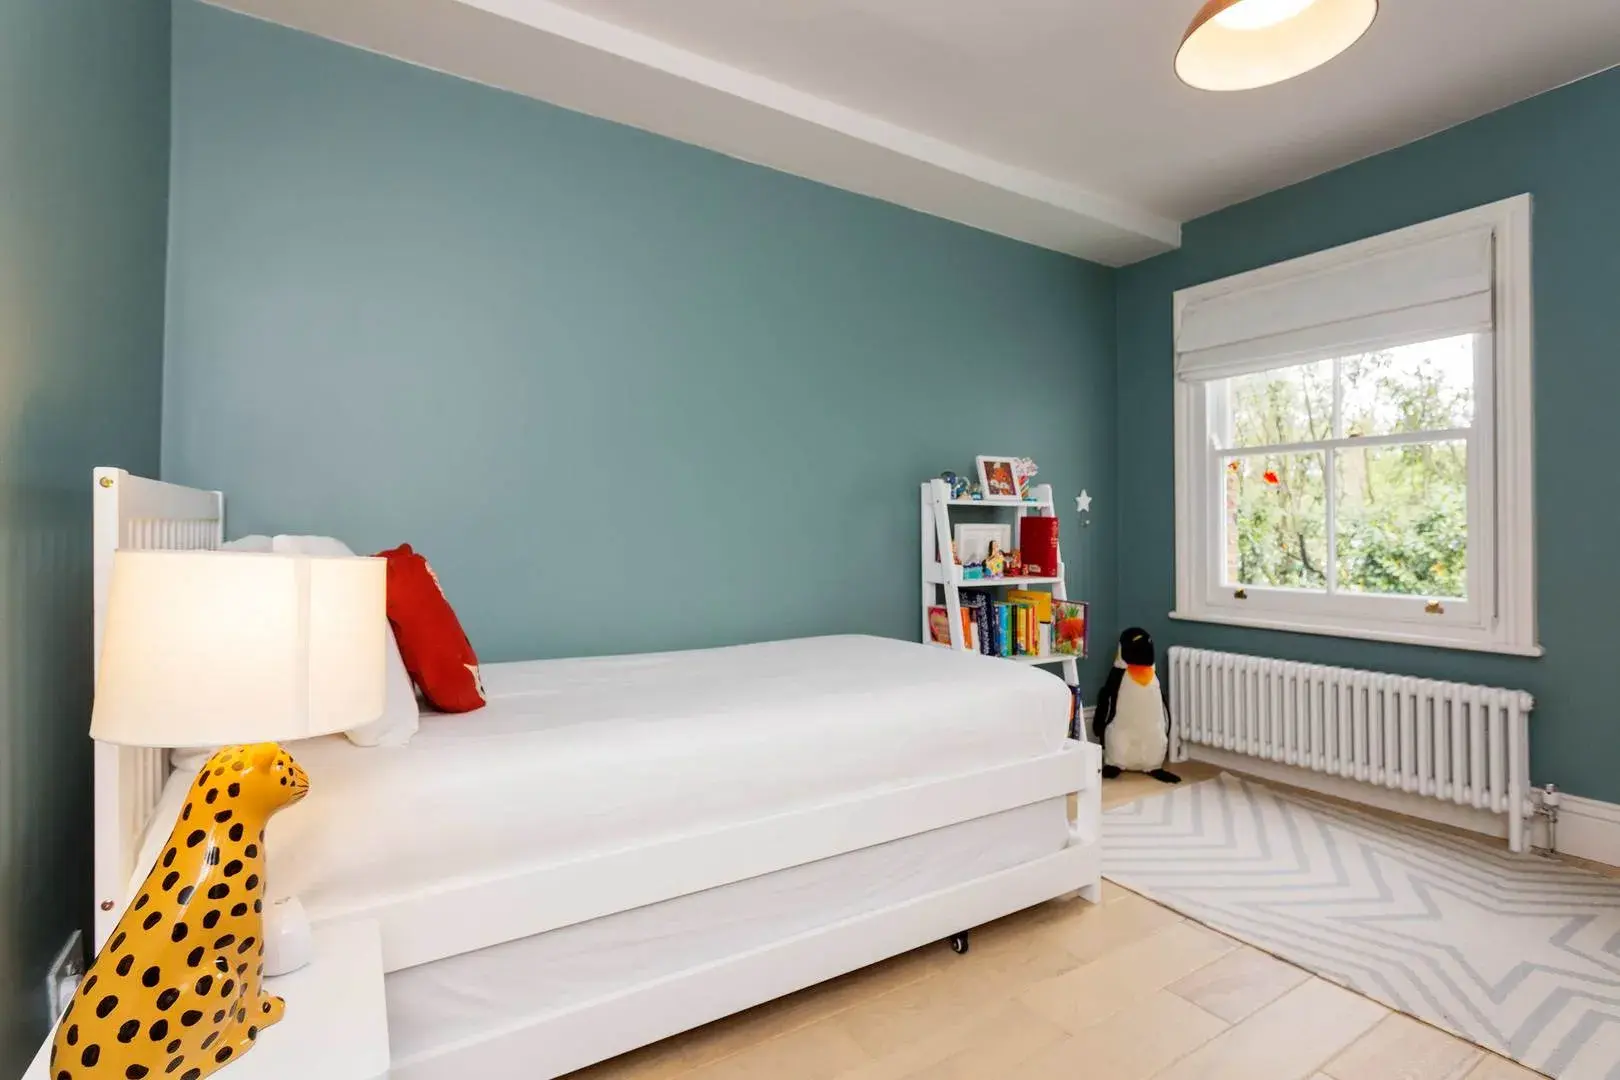 Melgund Road, holiday home in Islington, London